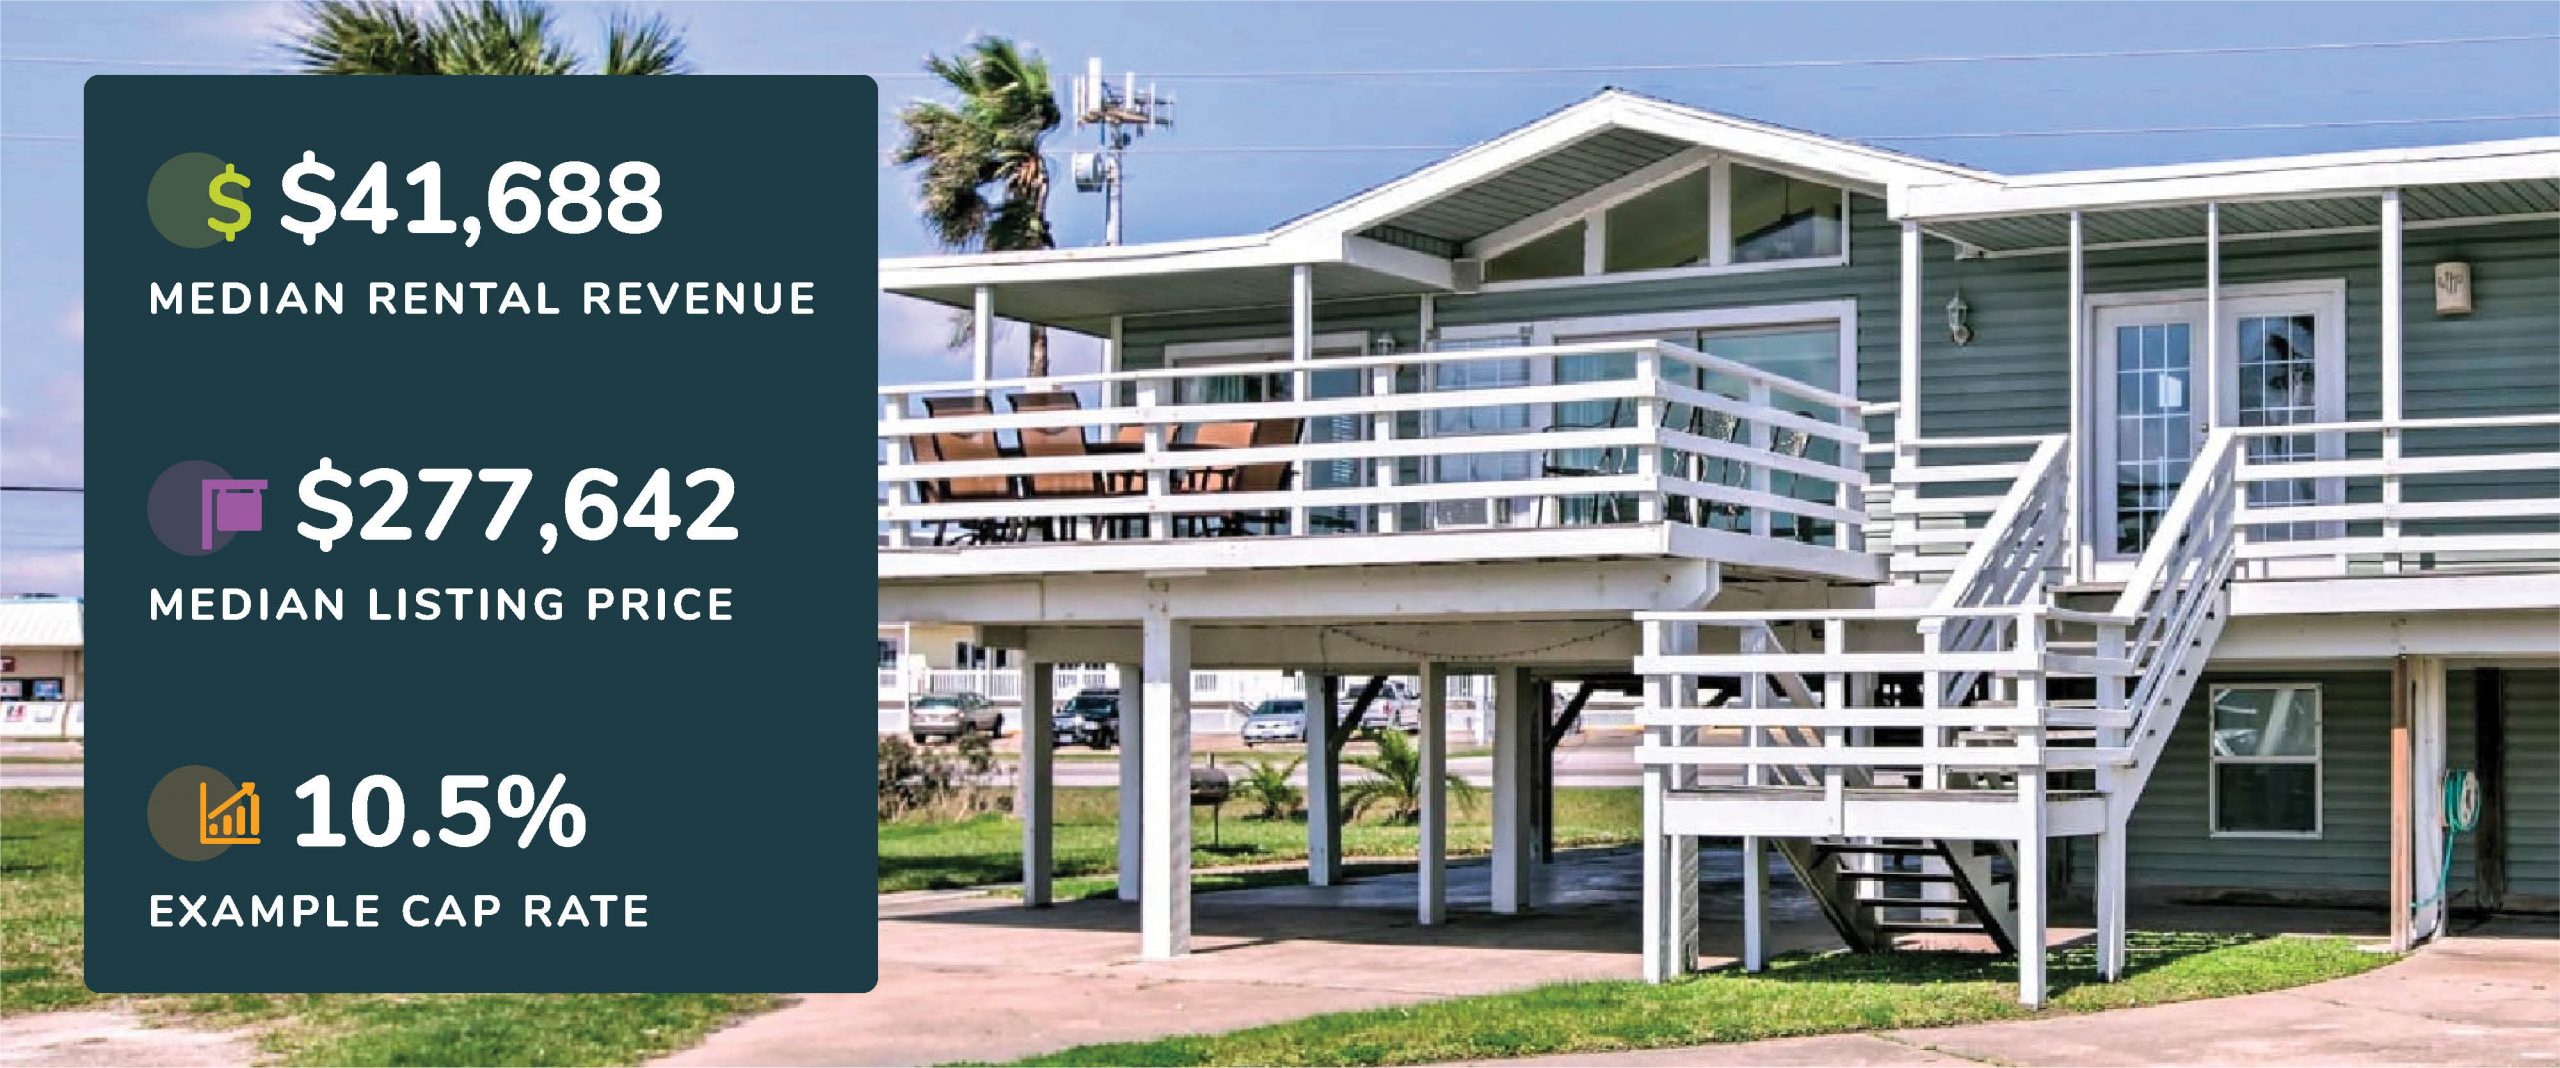 Graphic showing Surfside Beach, Texas median rental revenue, listing price, and example cap rate with a picture of a beach home